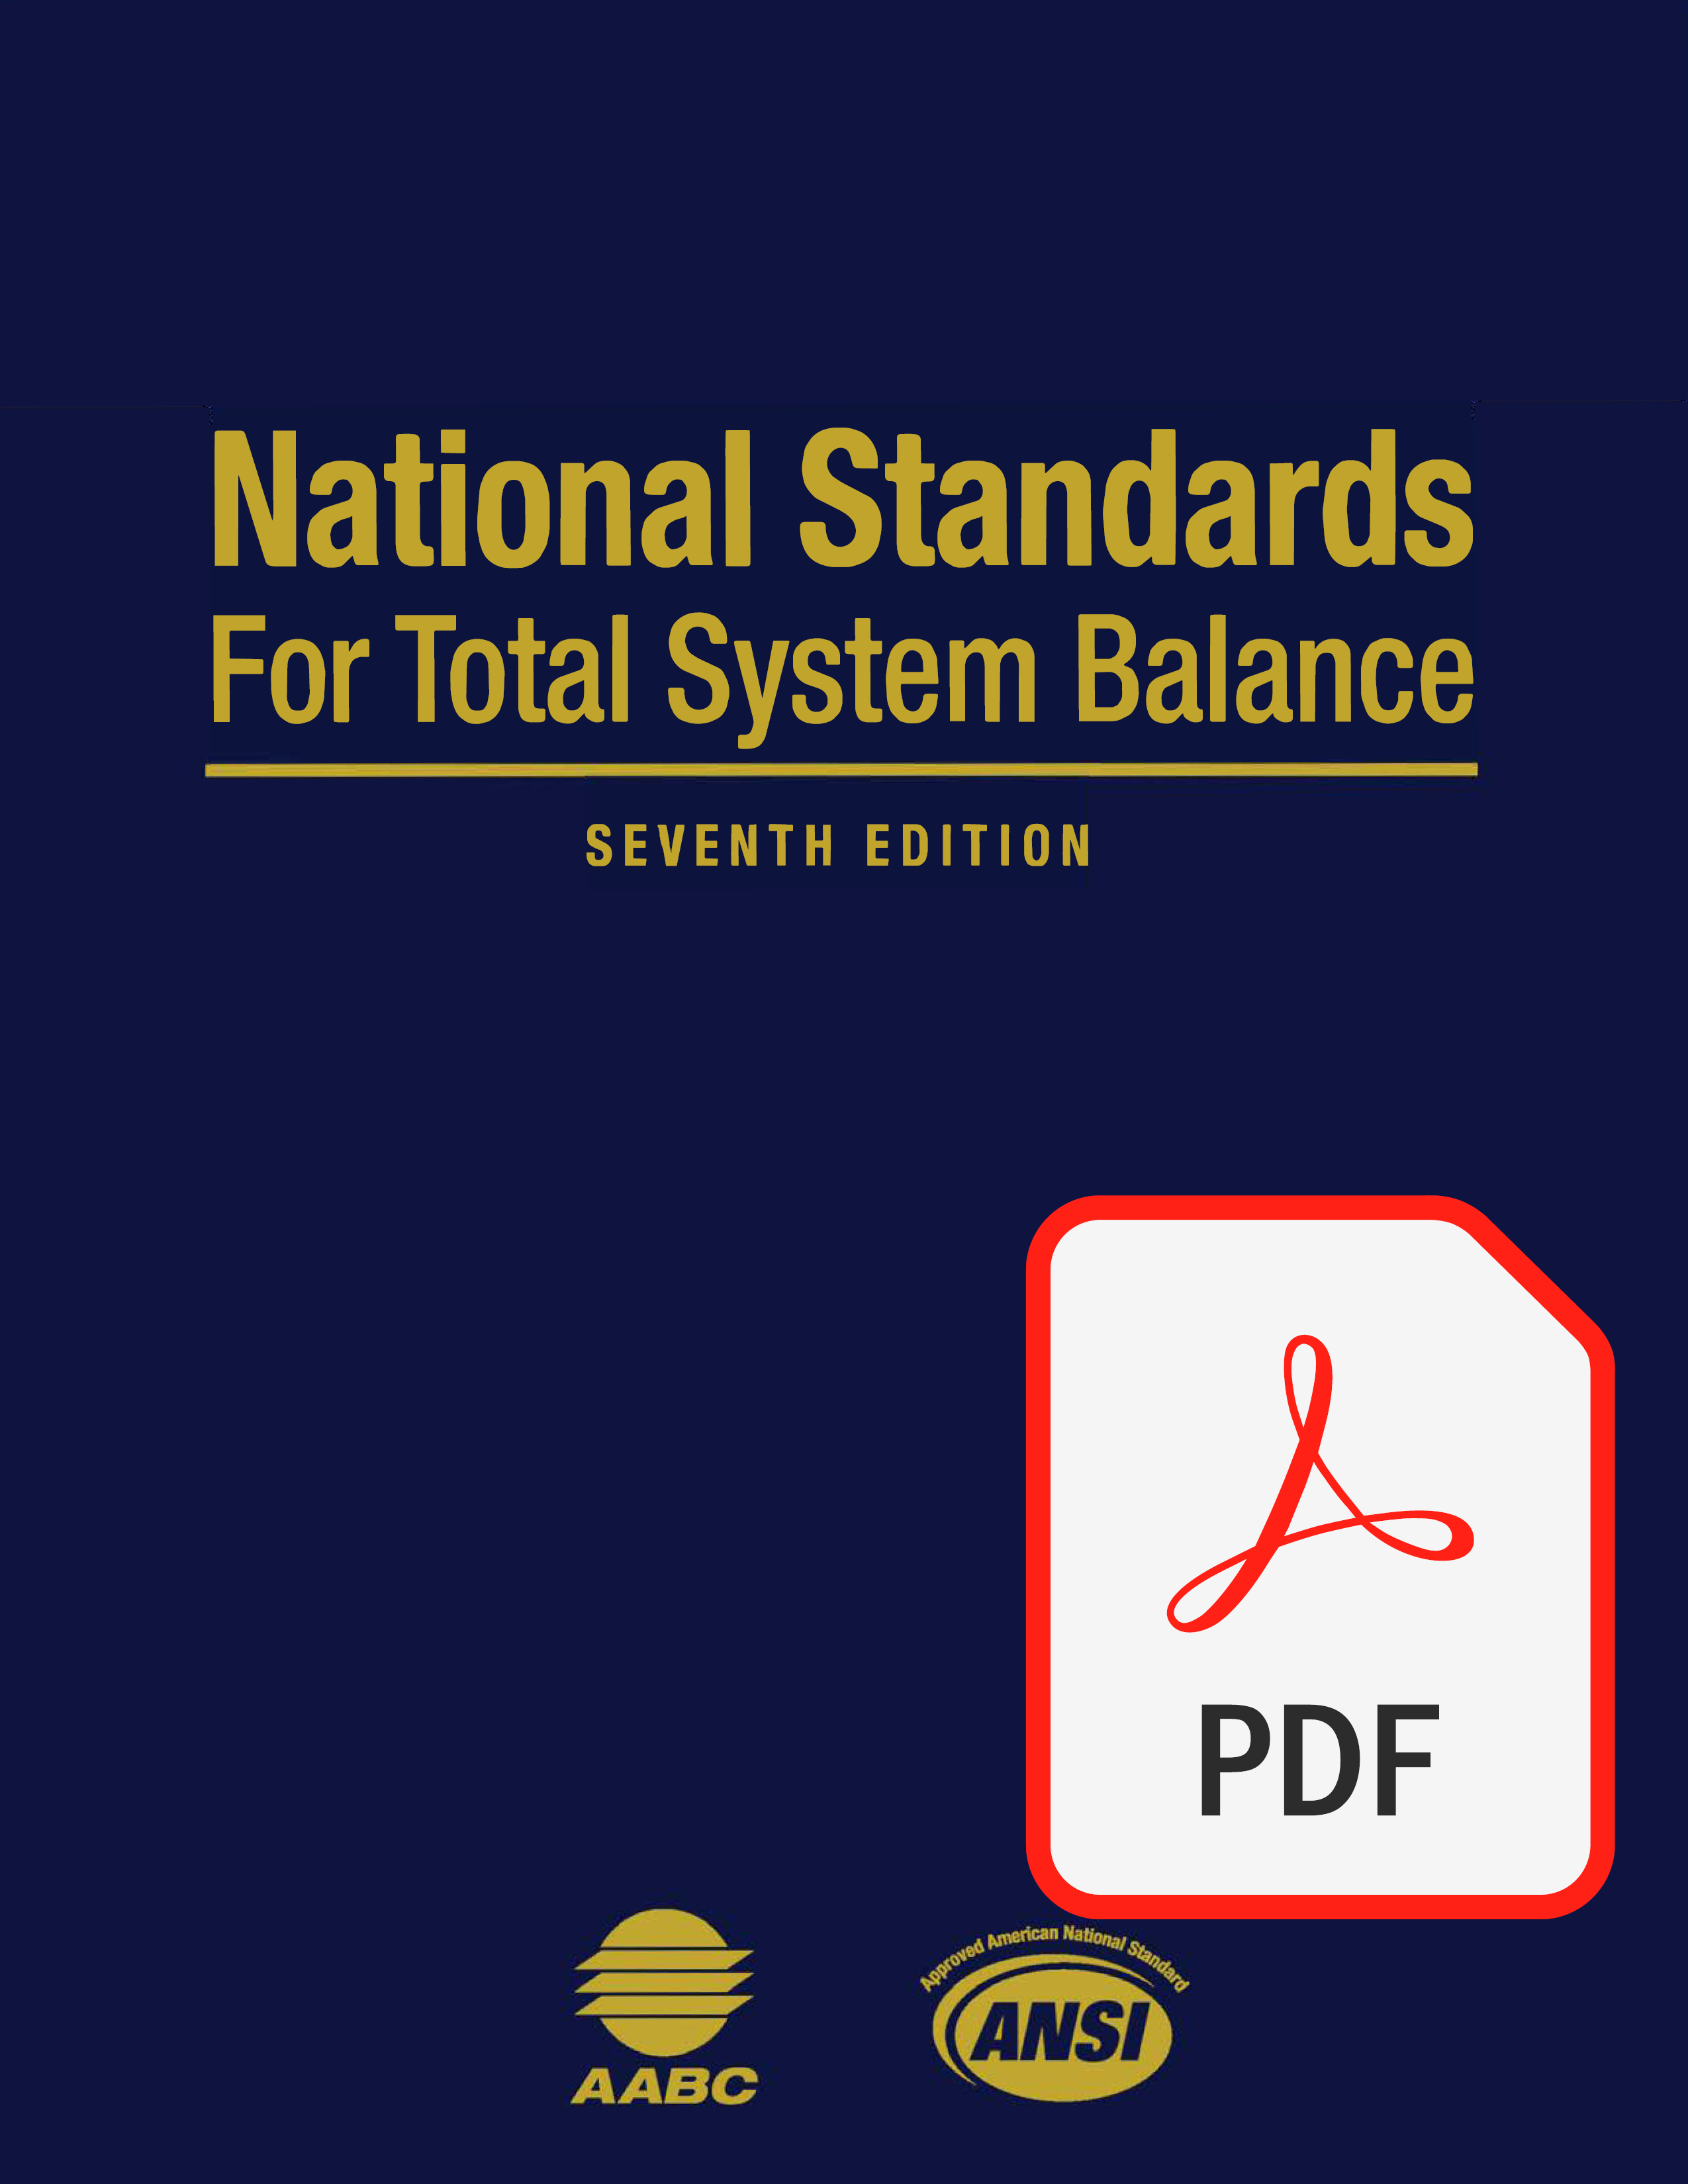 national standards book and pdf cover